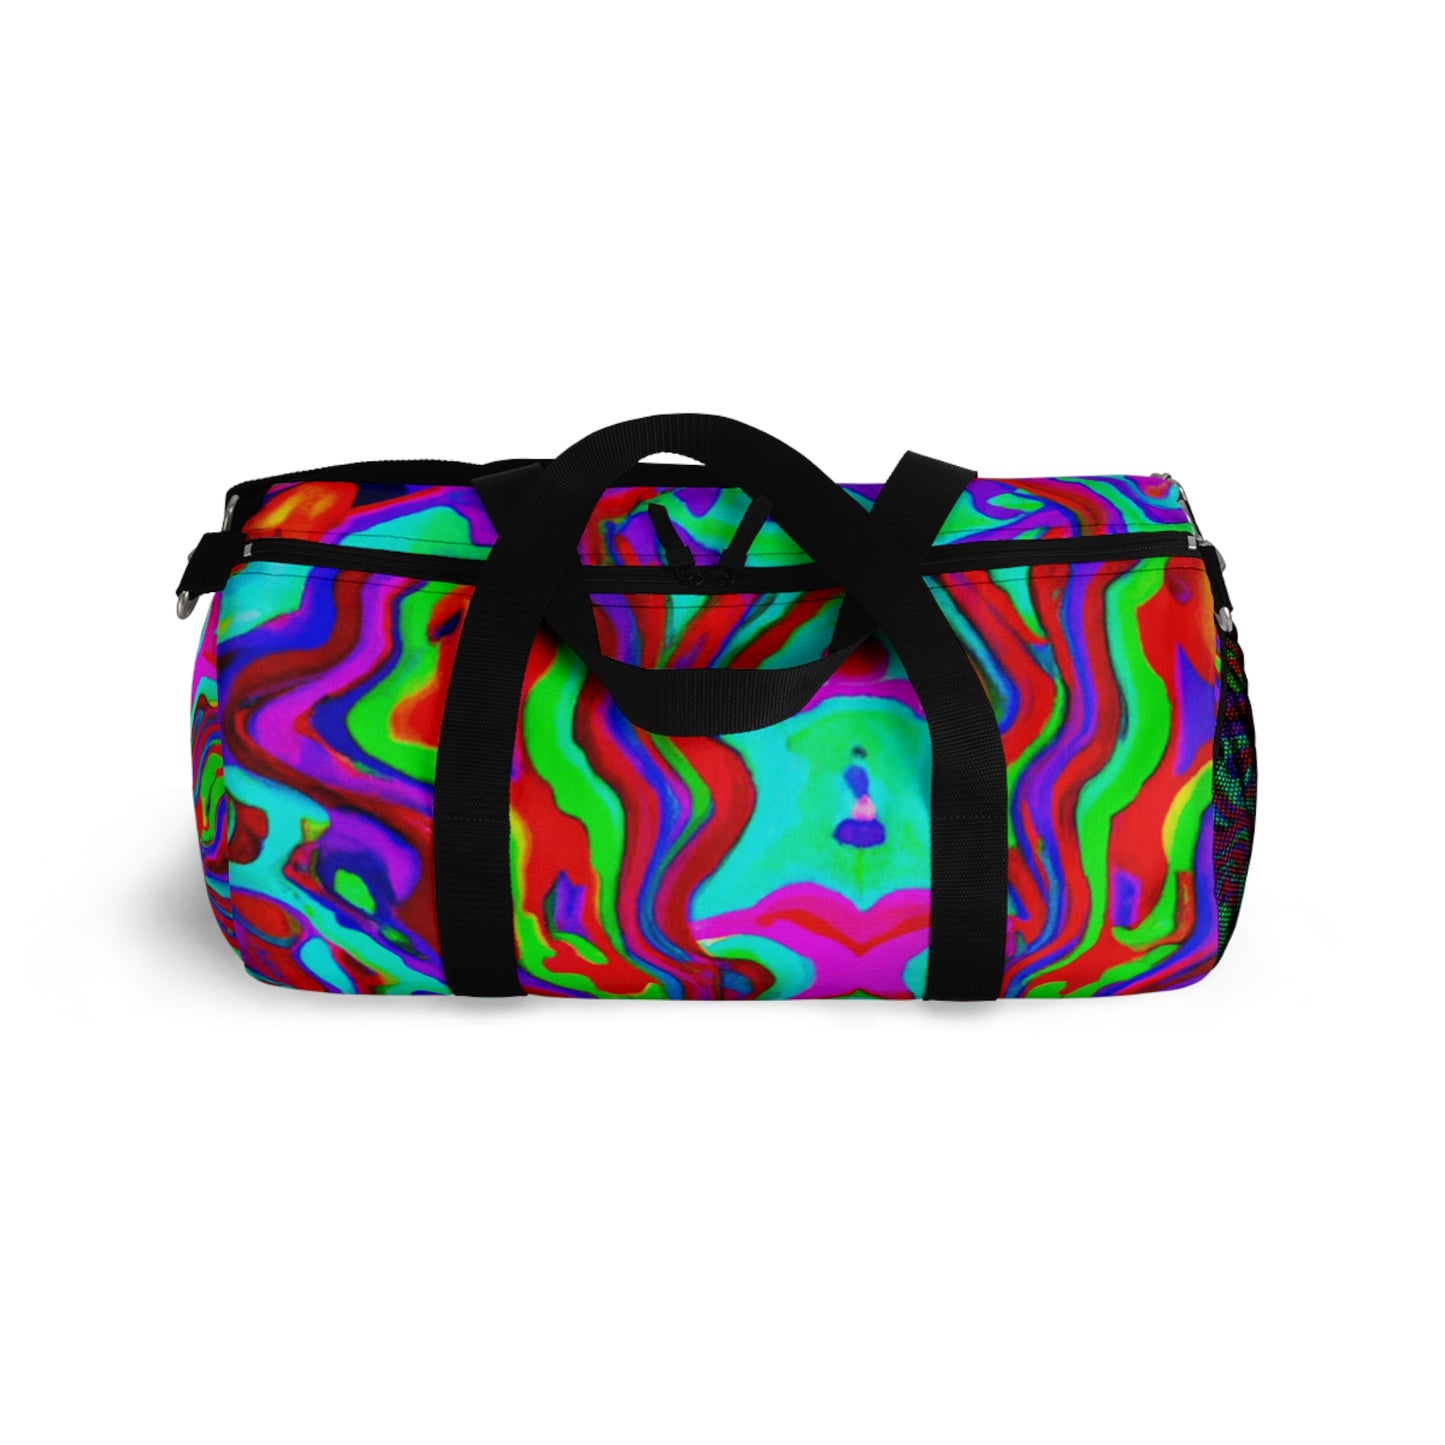 Fabergeo - Psychedelic Duffel Bag